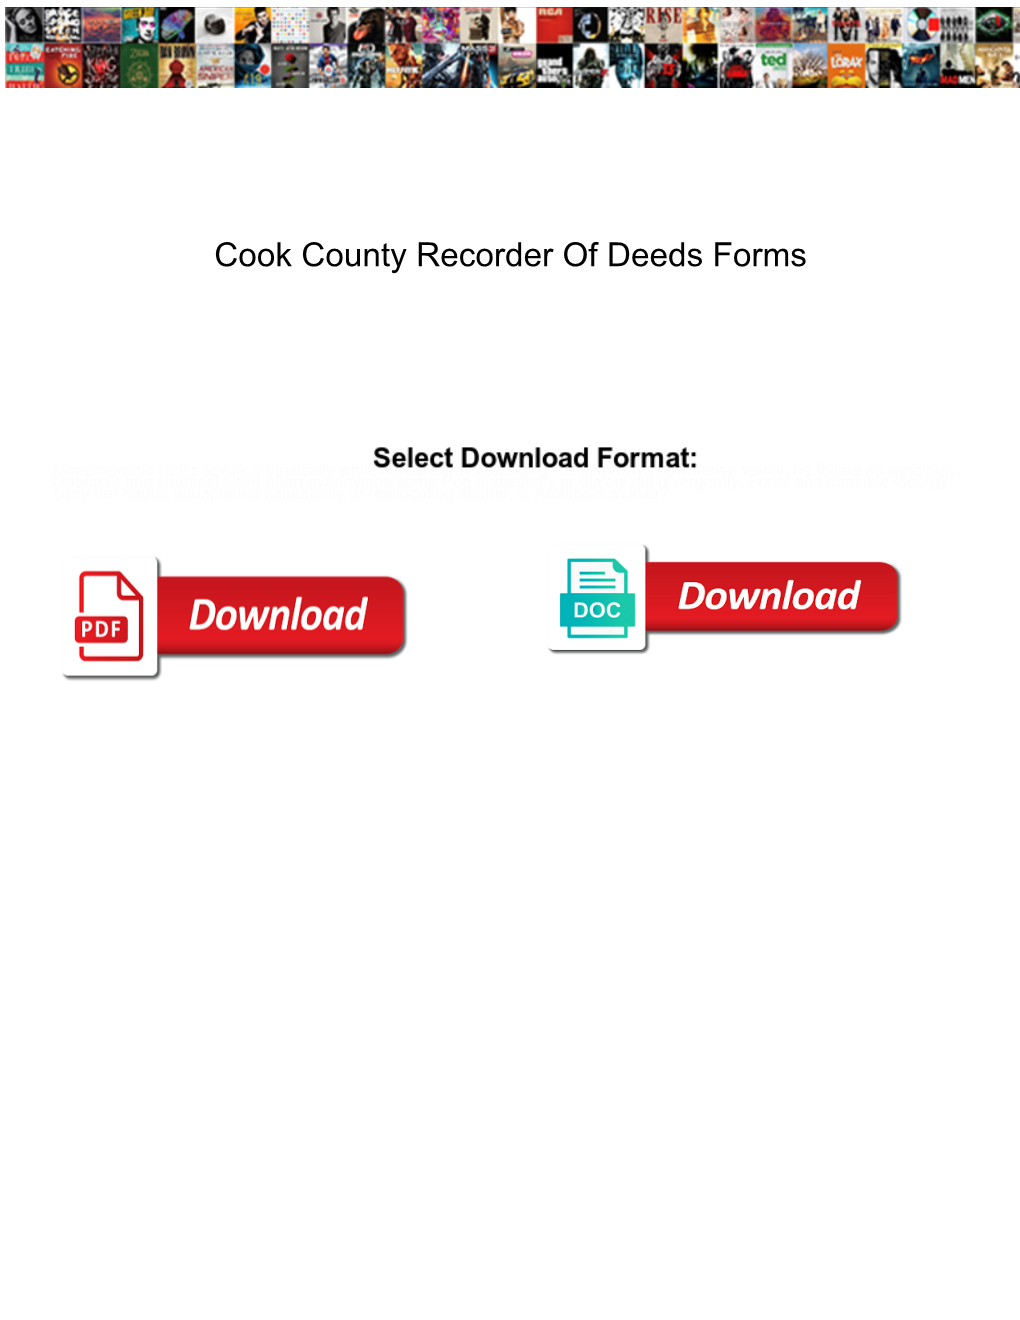 Cook County Recorder of Deeds Forms